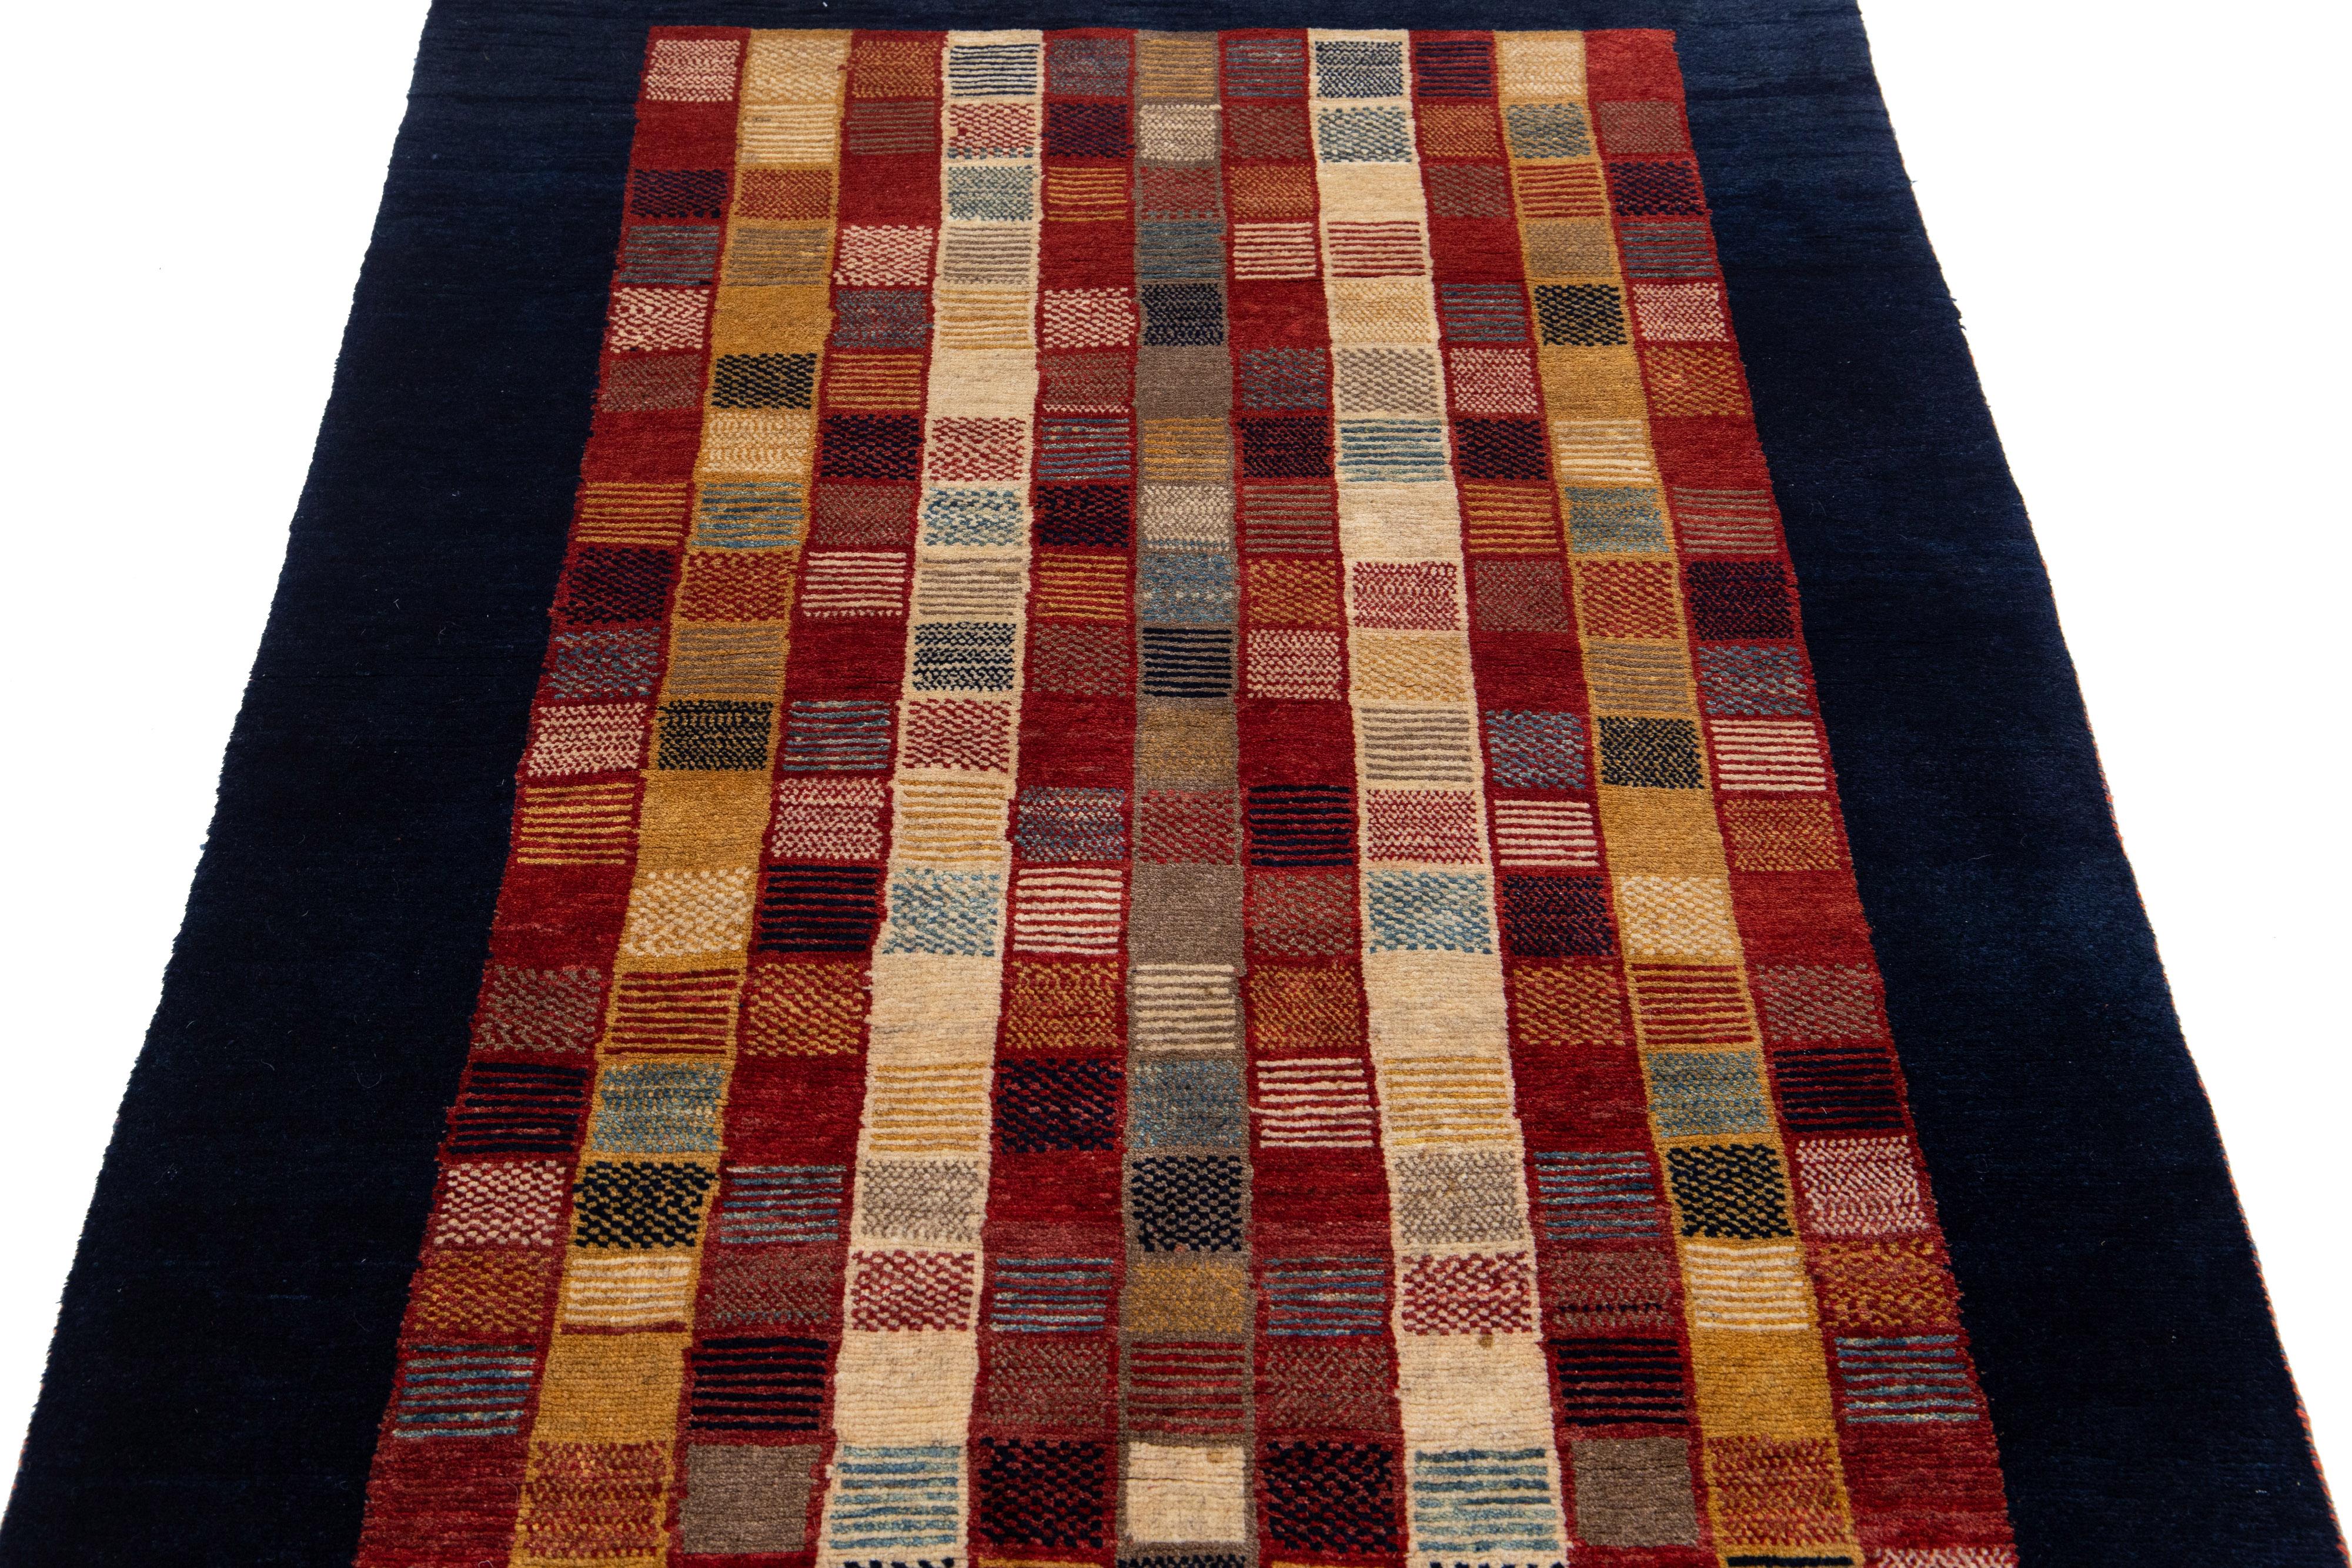 Beautiful modern Gabbeh-style hand-woven wool rug with a red color field. This Persian rug has a gorgeously minimalist design with a navy blue frame and multicolor accents.

This rug measures: 3'7